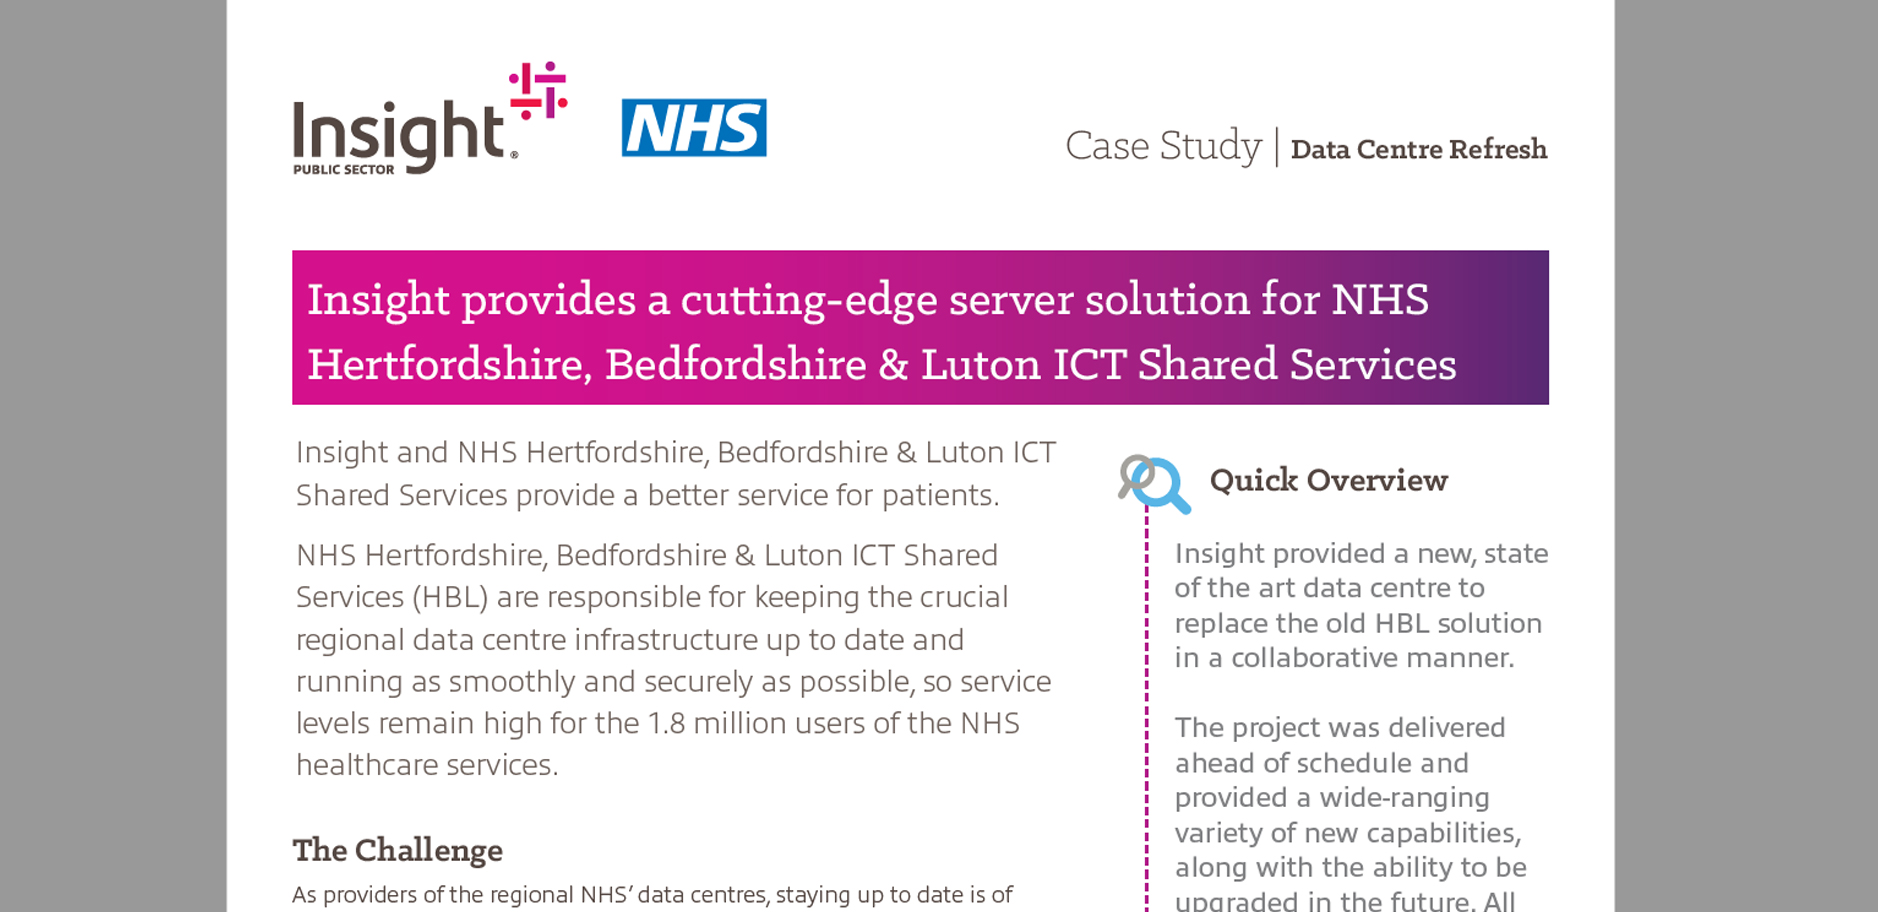 Download the case study below to learn how Insight helped the NHS